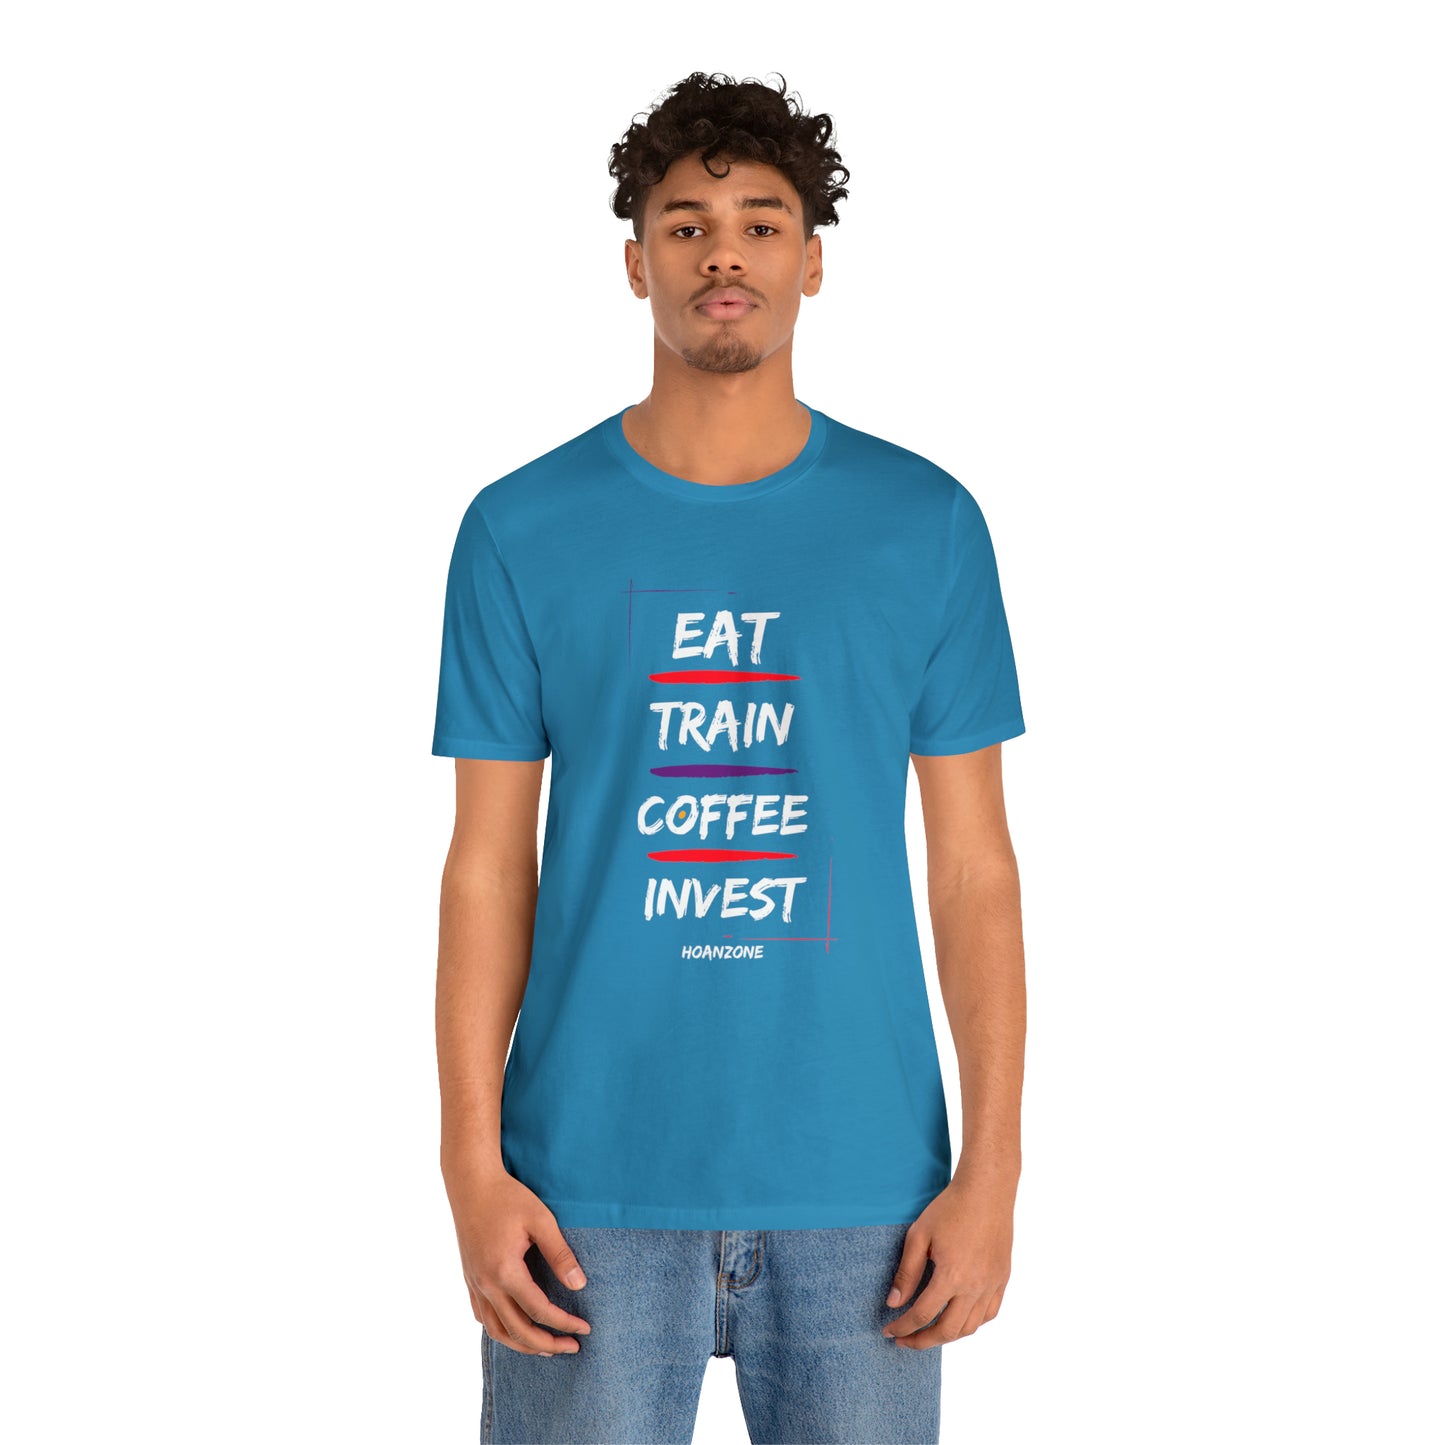 Eat, Train, Coffee, Invest